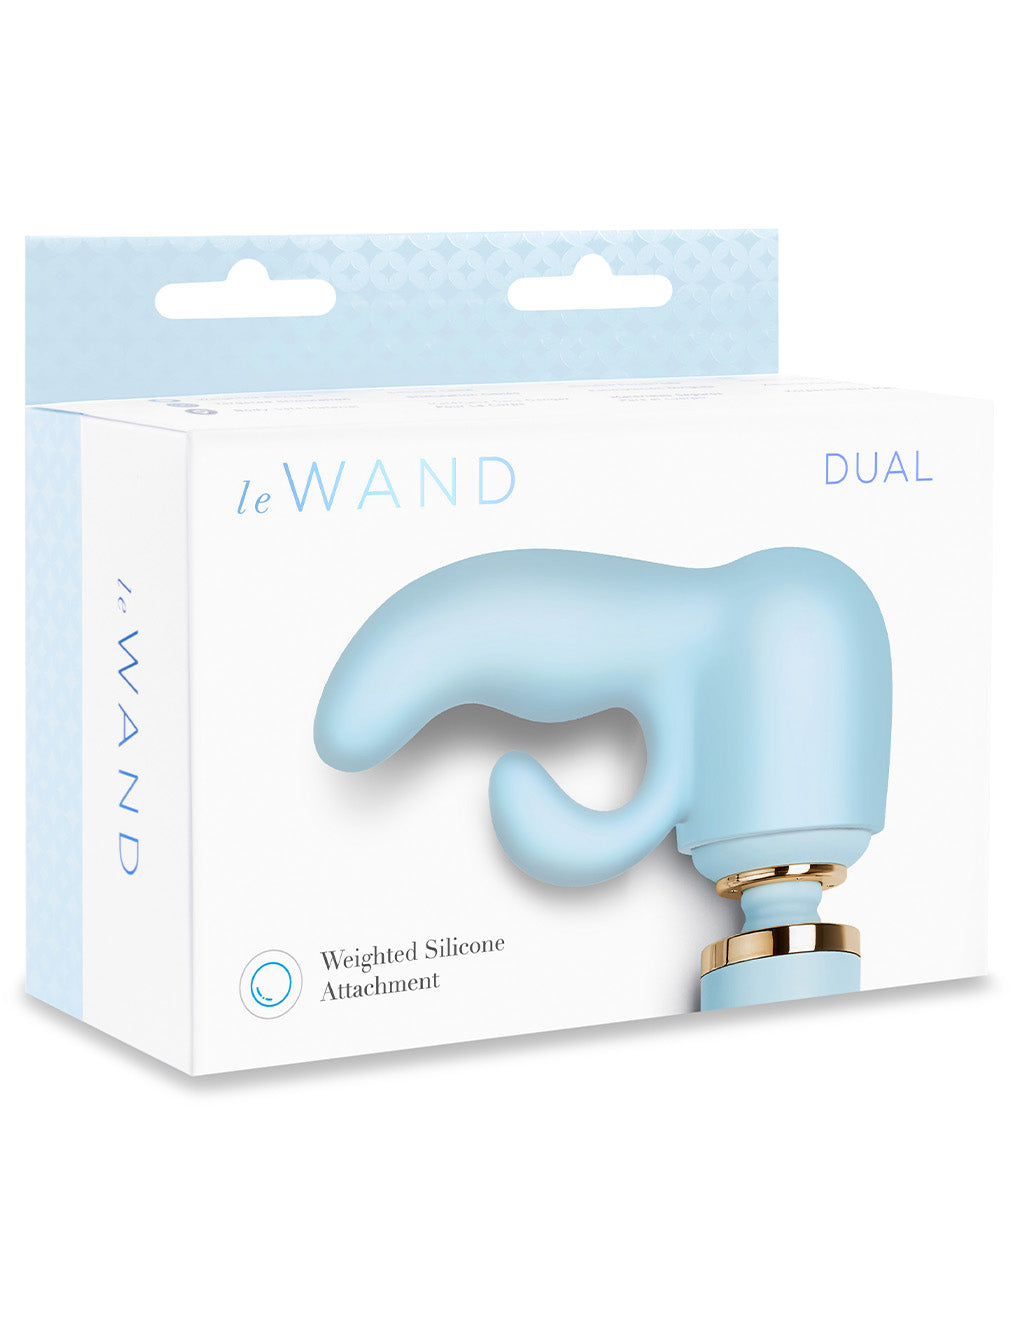 Le Wand Original Dual Weighted Attachment- Package